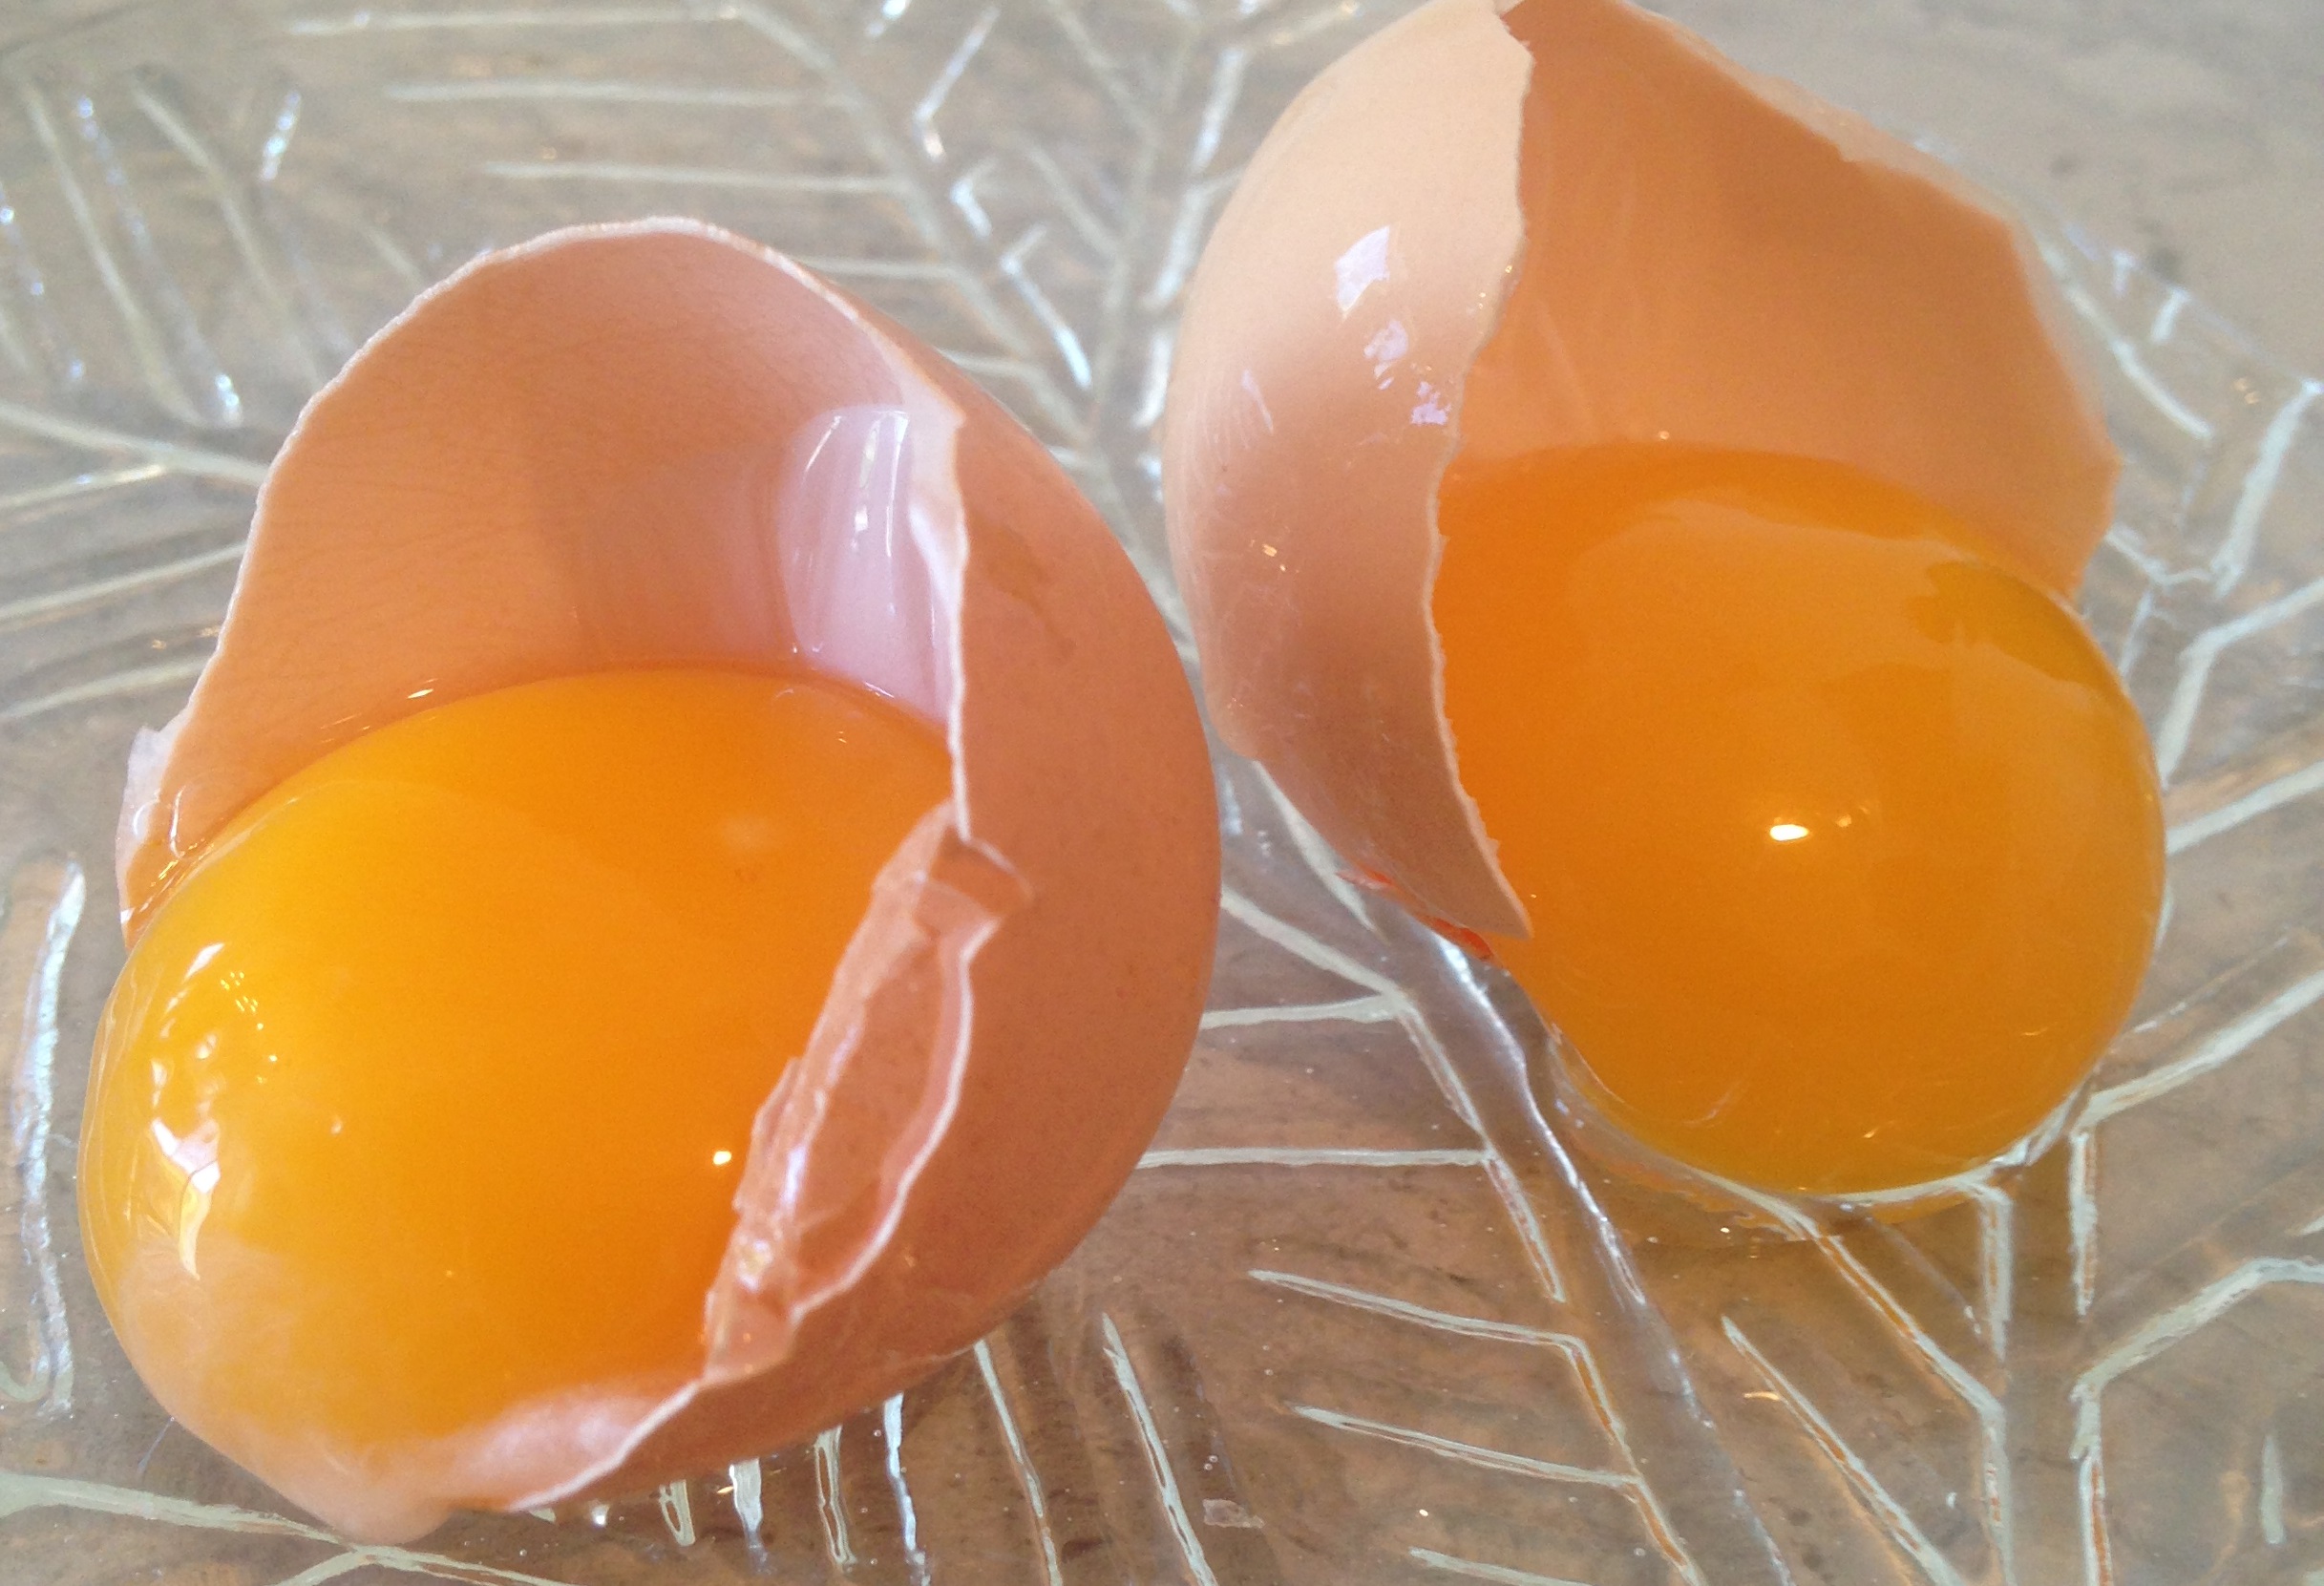 Making Eggs? You Can Make a Calcium Supplement